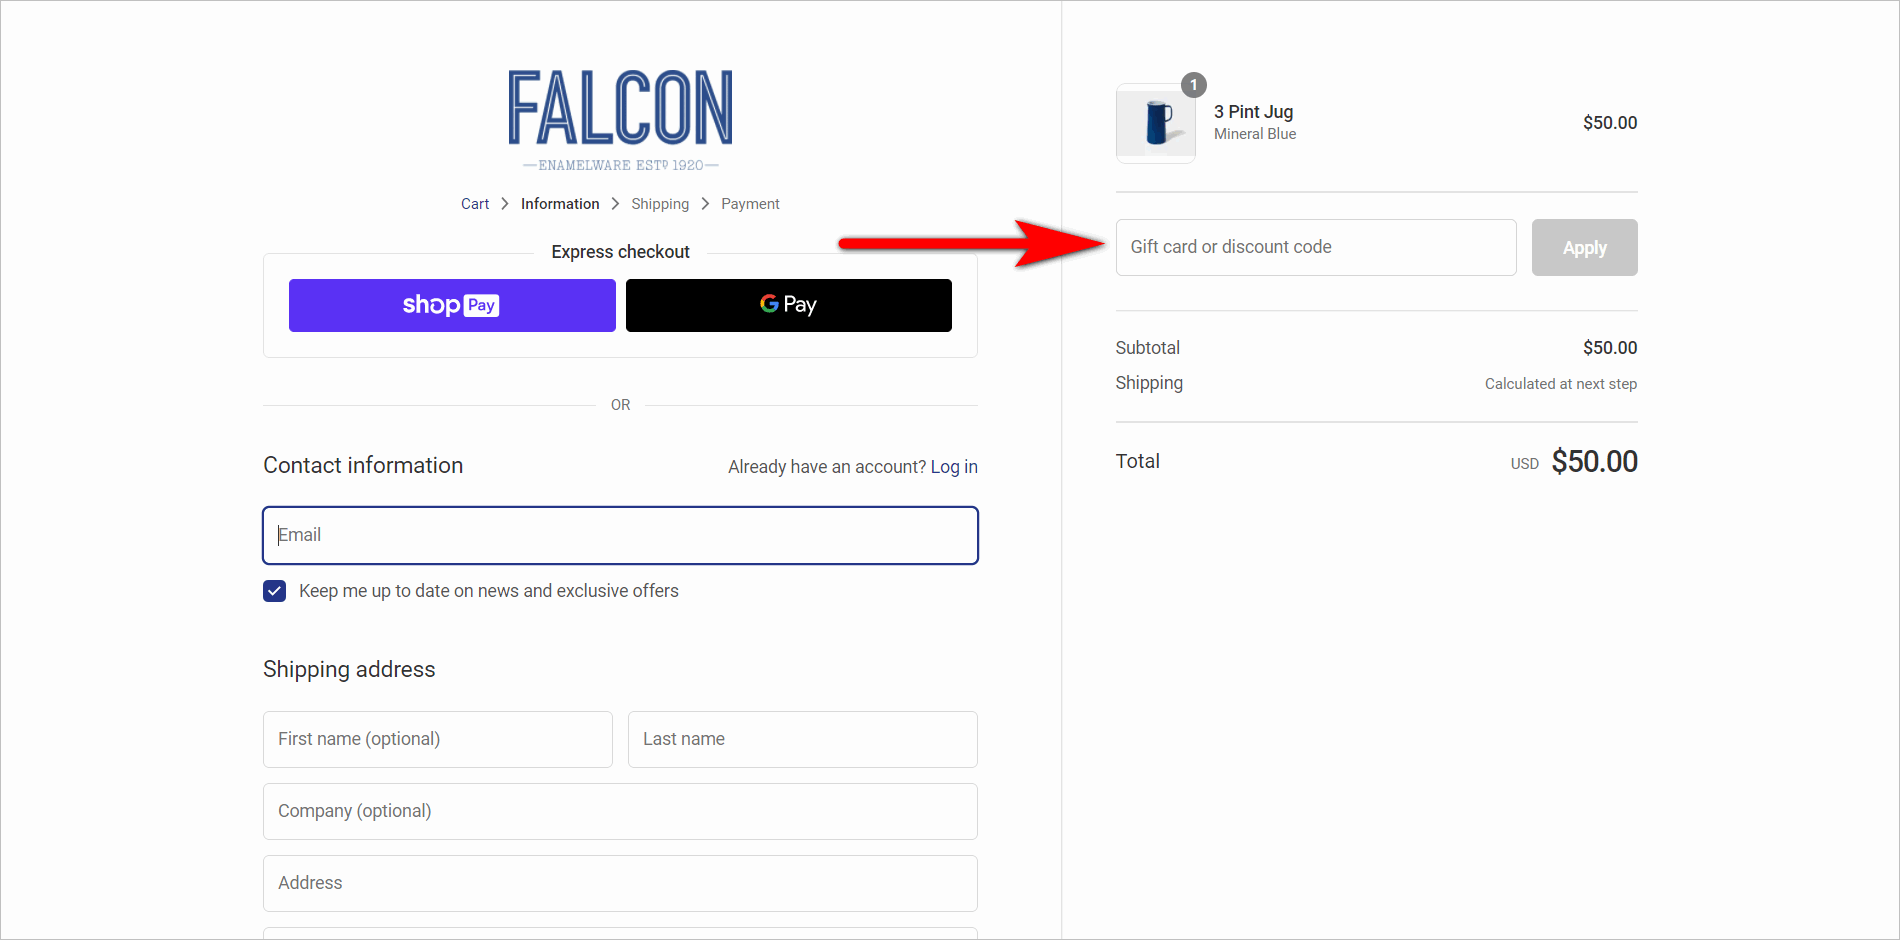 prominent promo code box example- us.falconenamelware.com's checkout page has a visually prominent prominent 